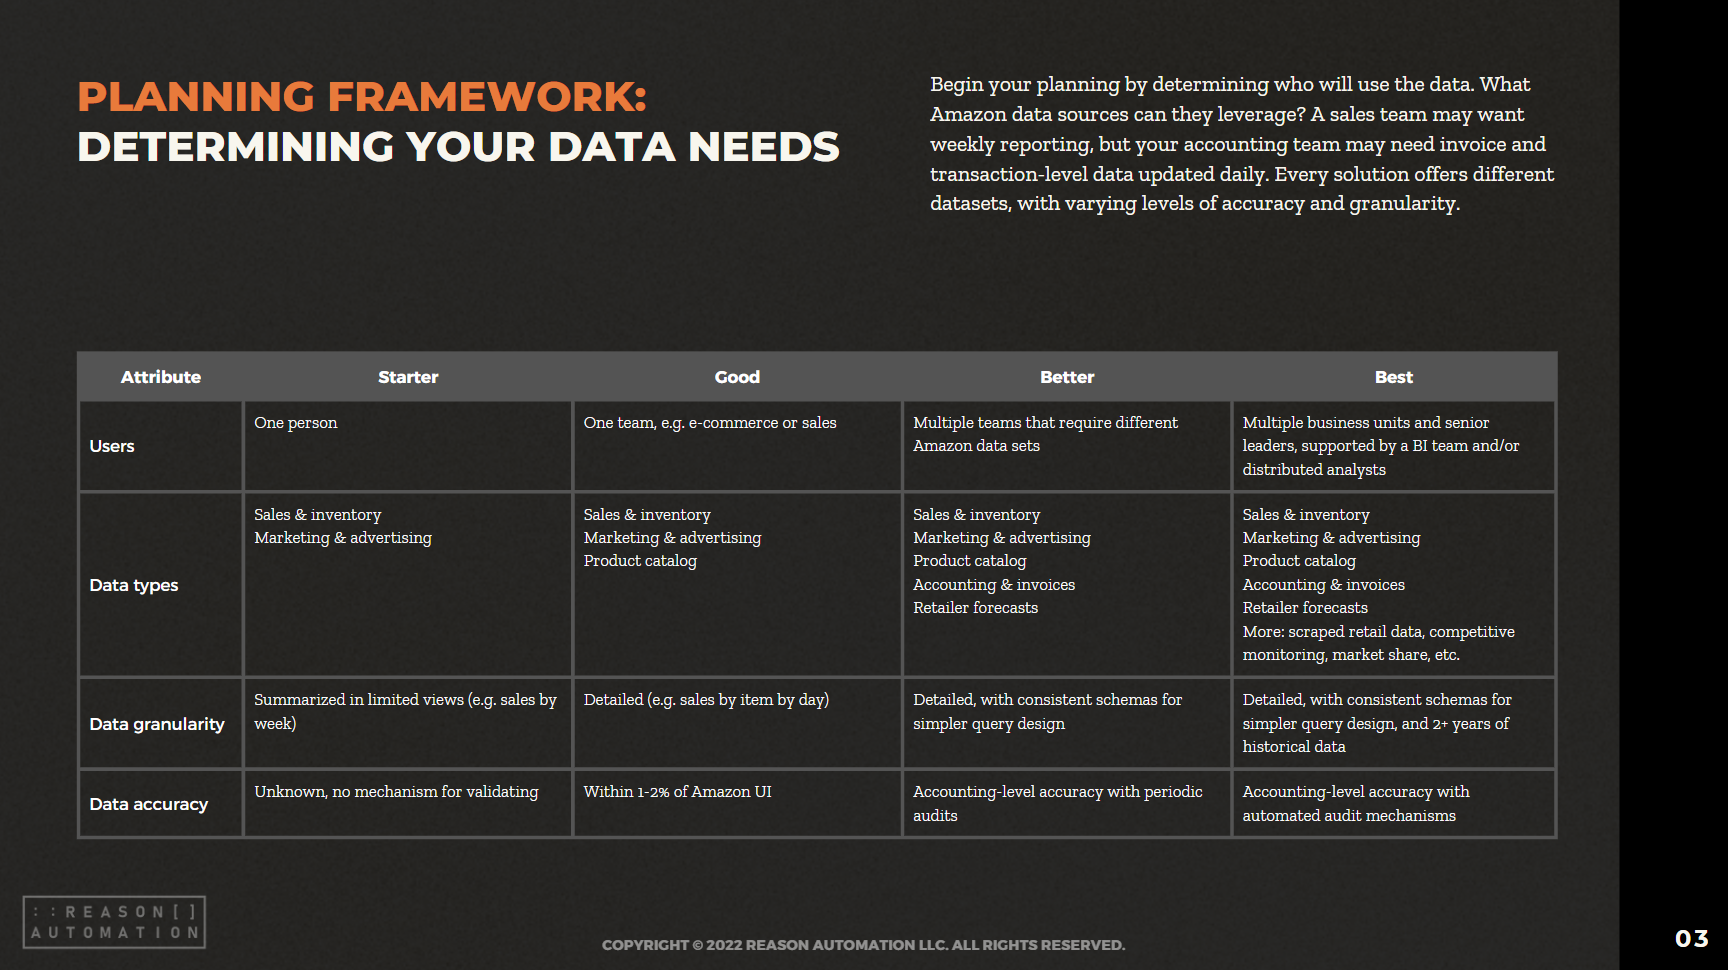 Whitepaper example page, planning framework part 1, determining your data needs